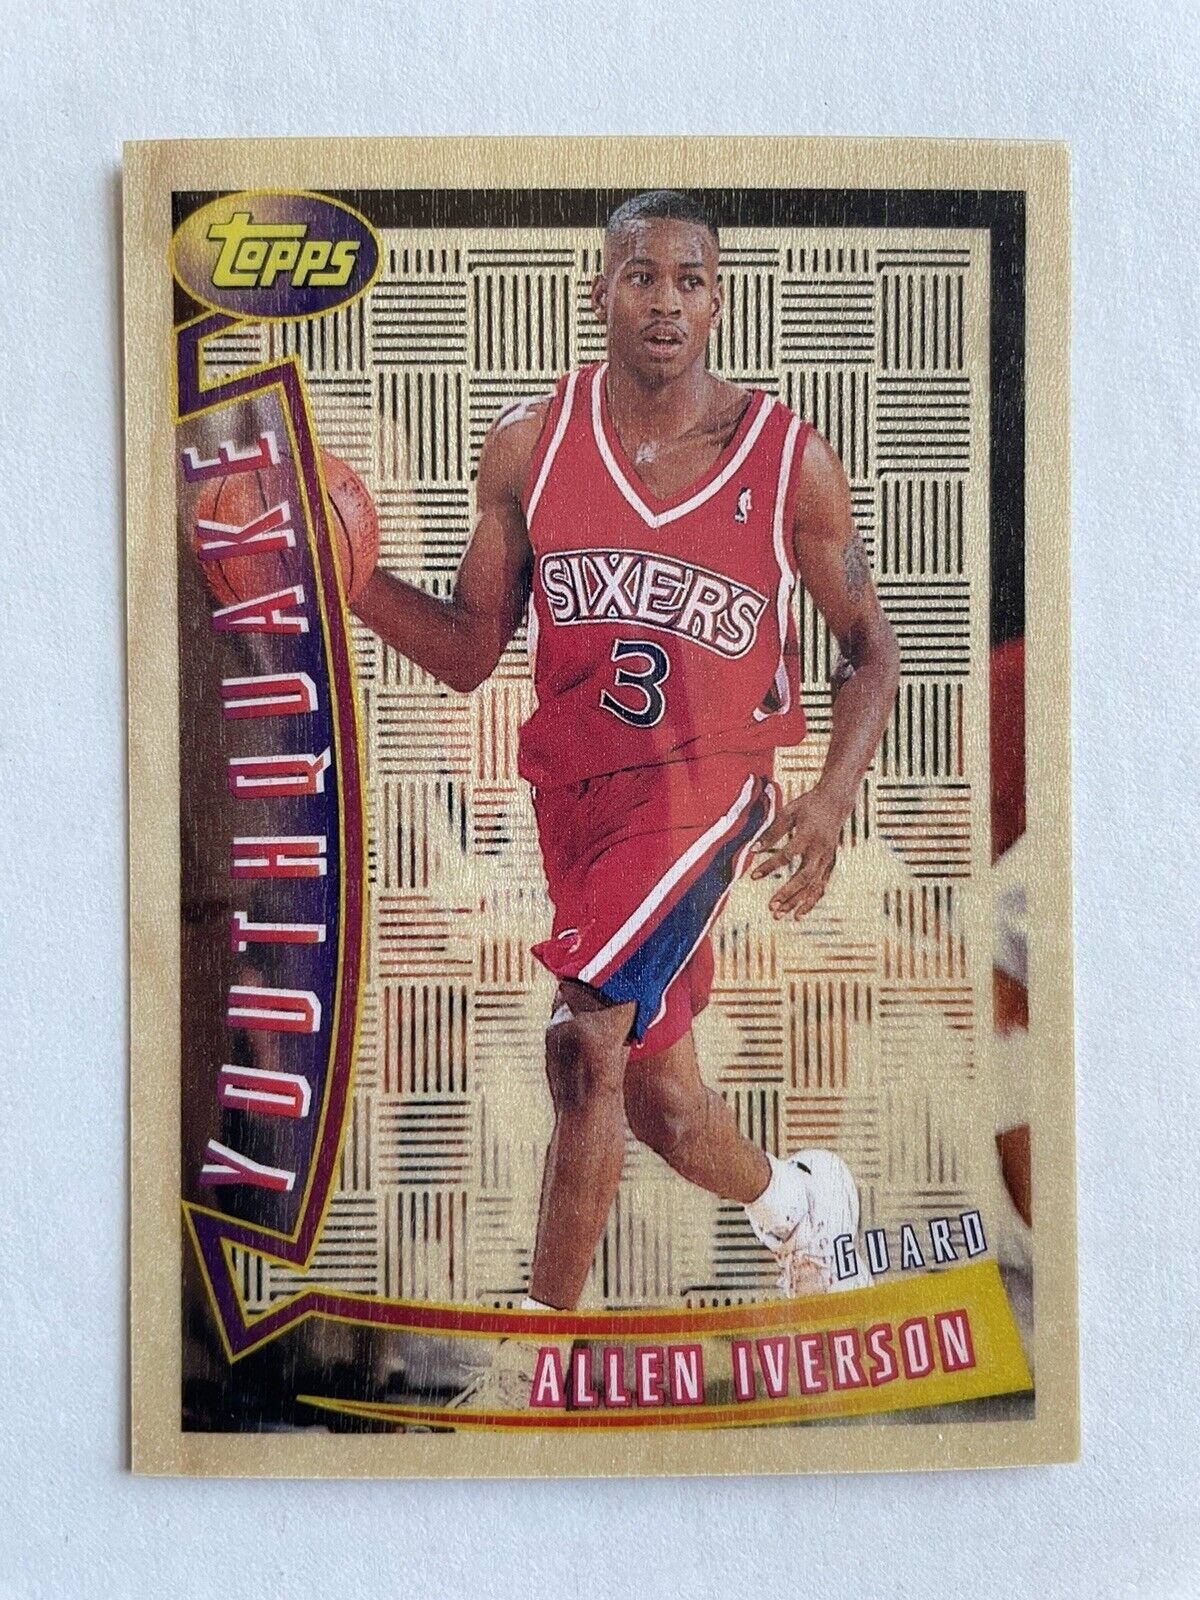 Allen Iverson 1996-97 Topps Youthquake Rookie YQ-1 | eBay